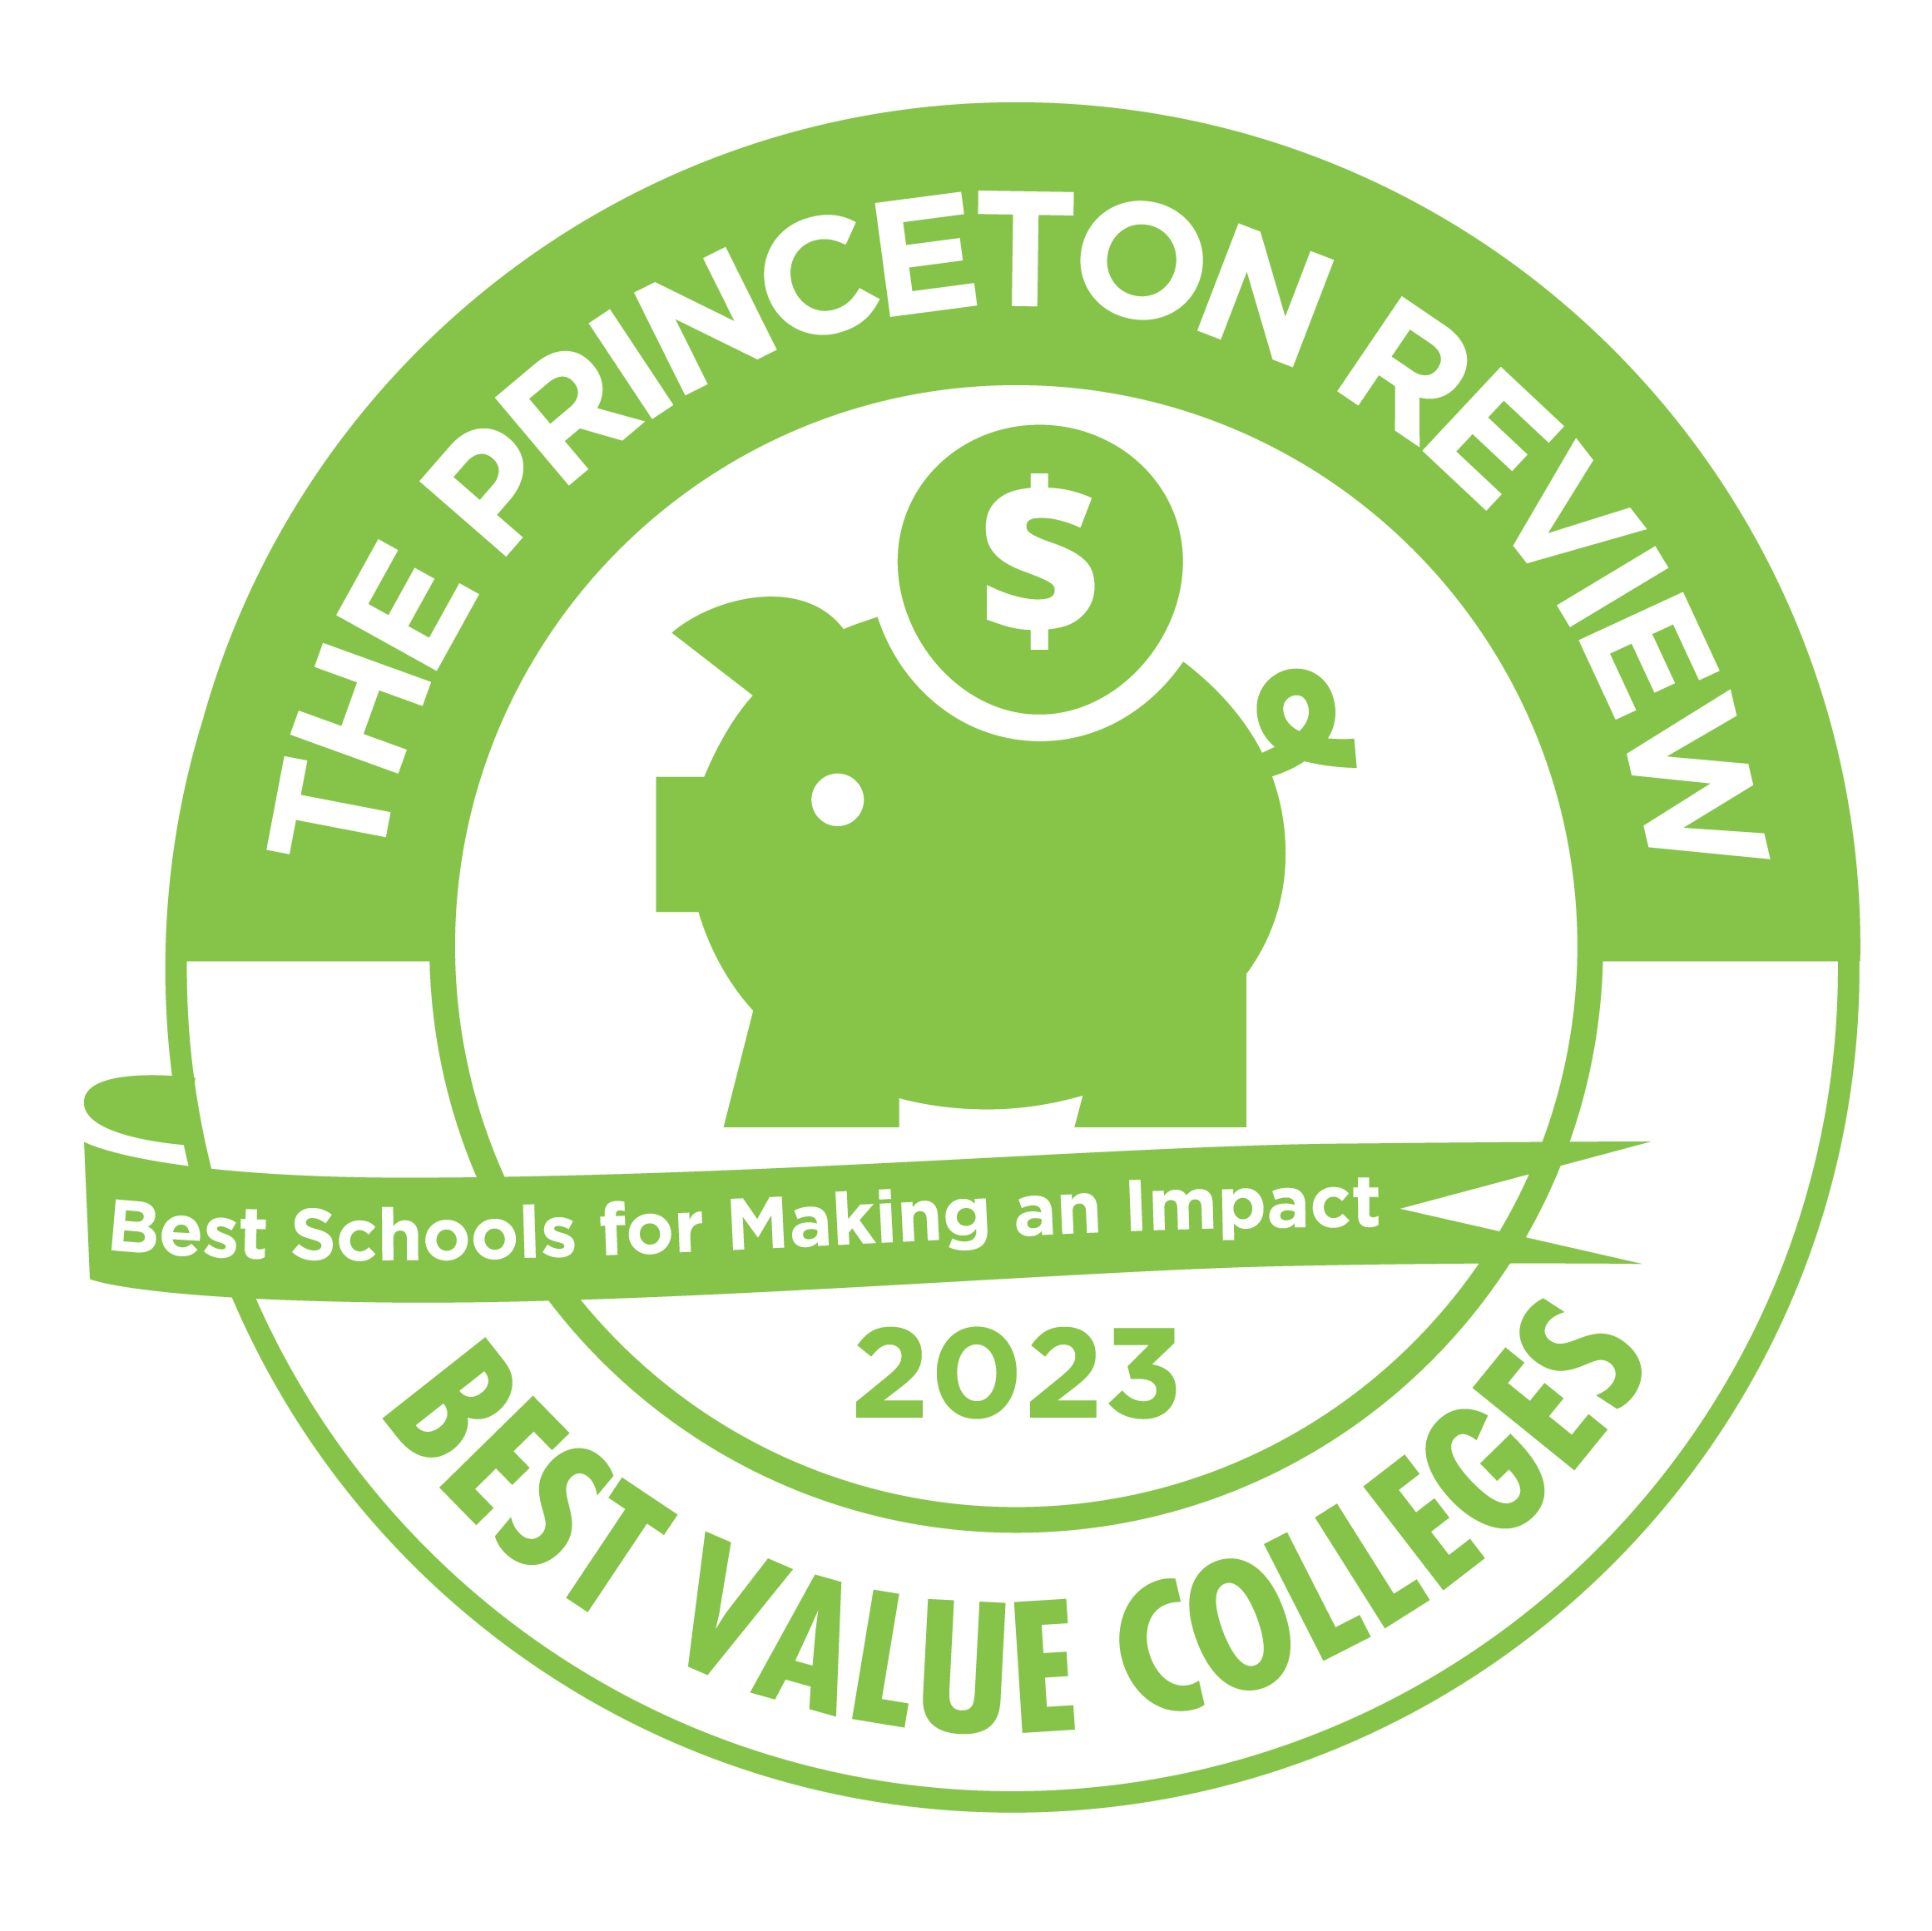 The Princeton Review Best Value College icon